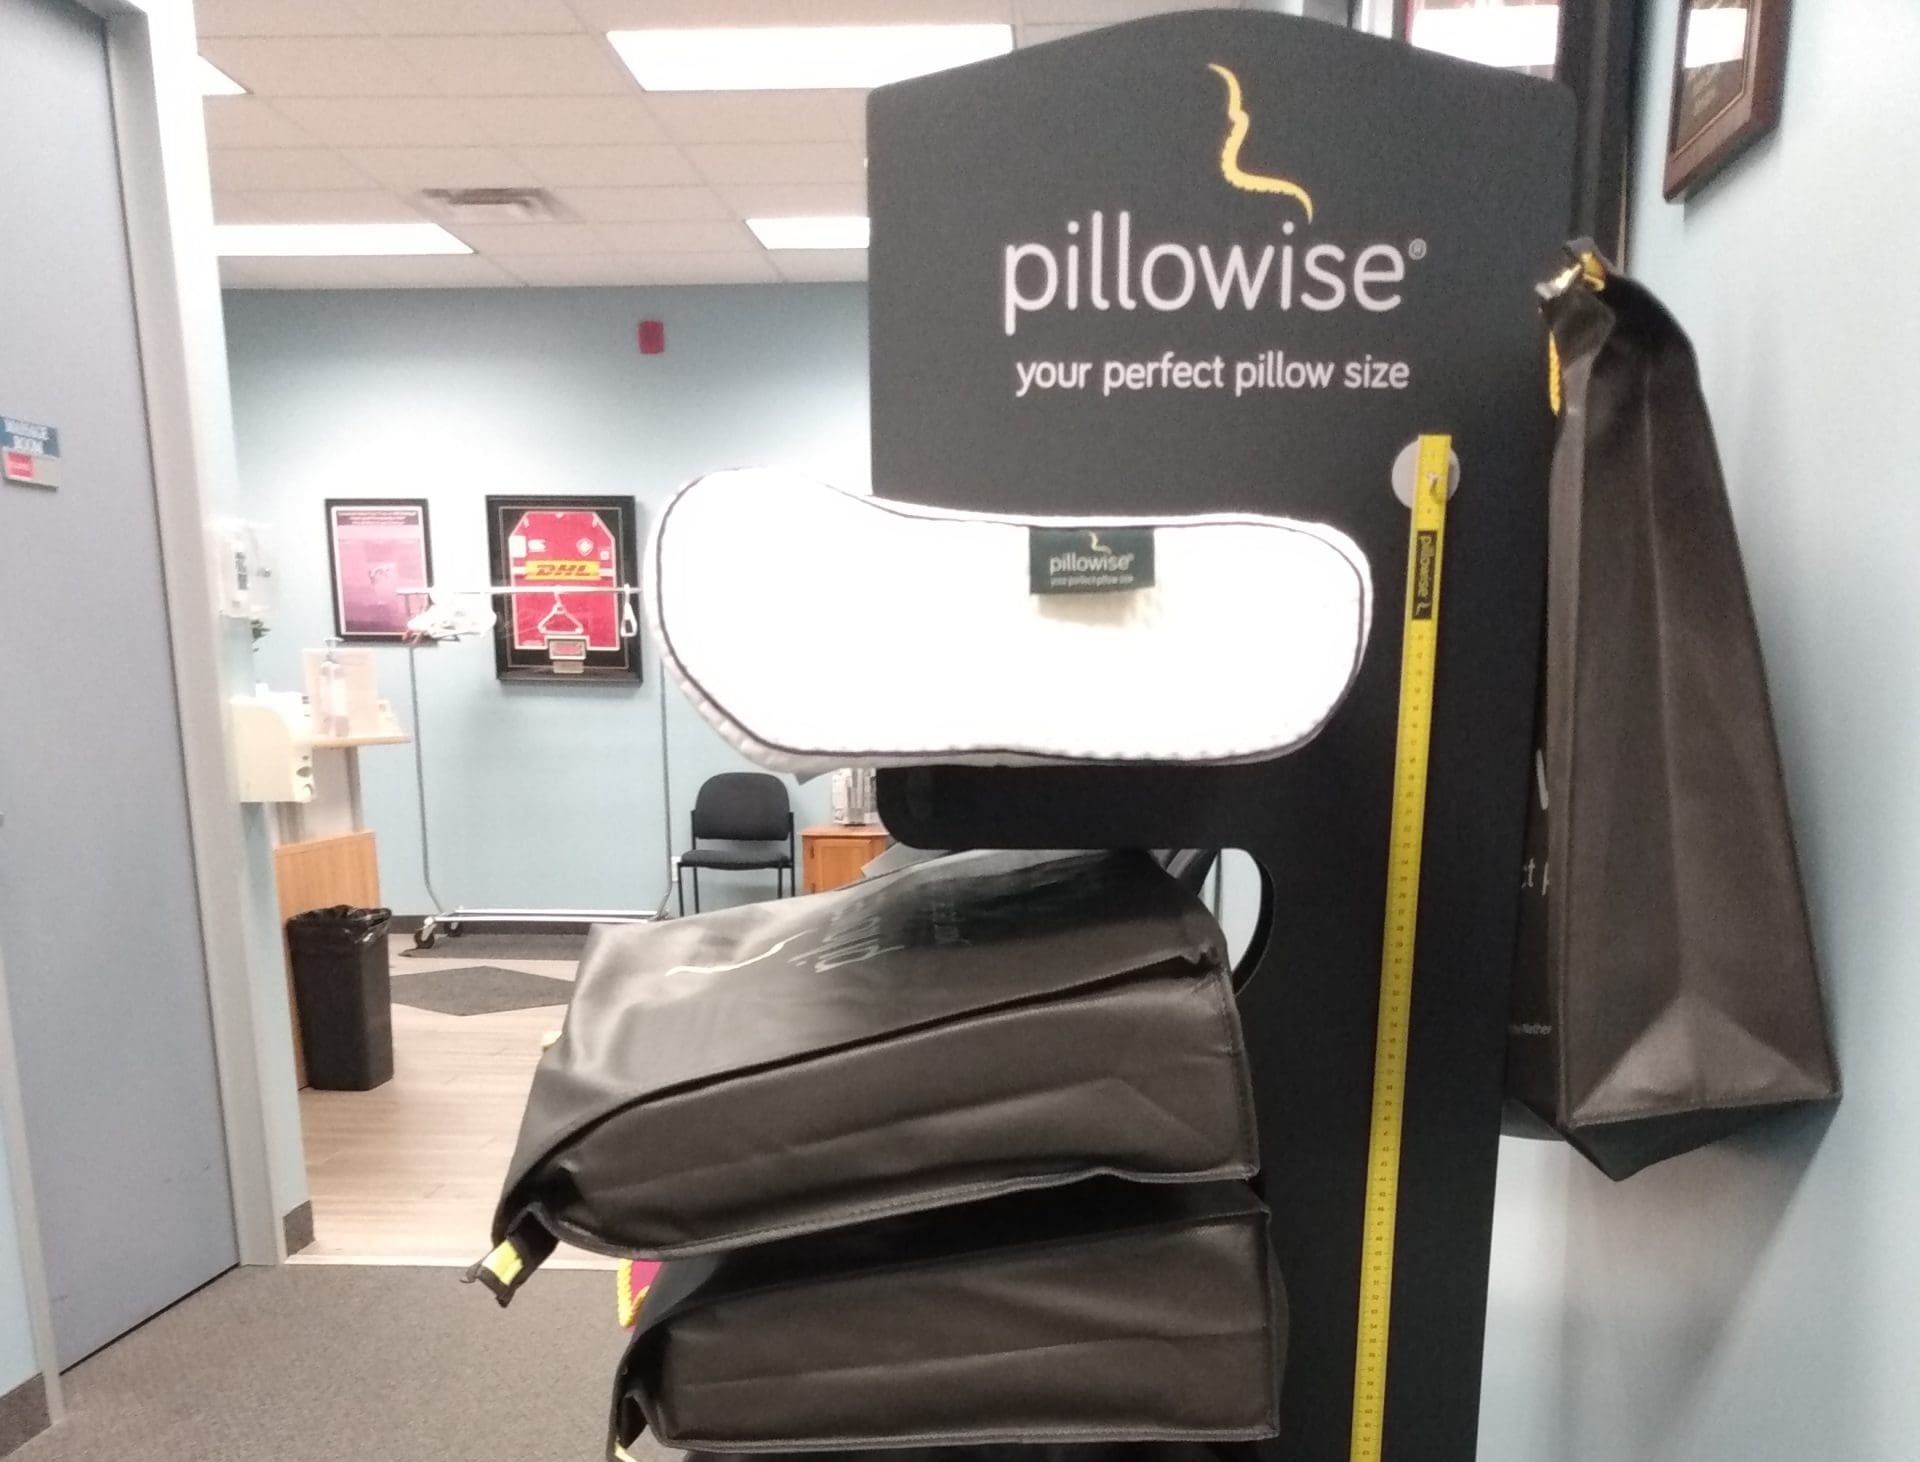 Featured Product: Pillowise